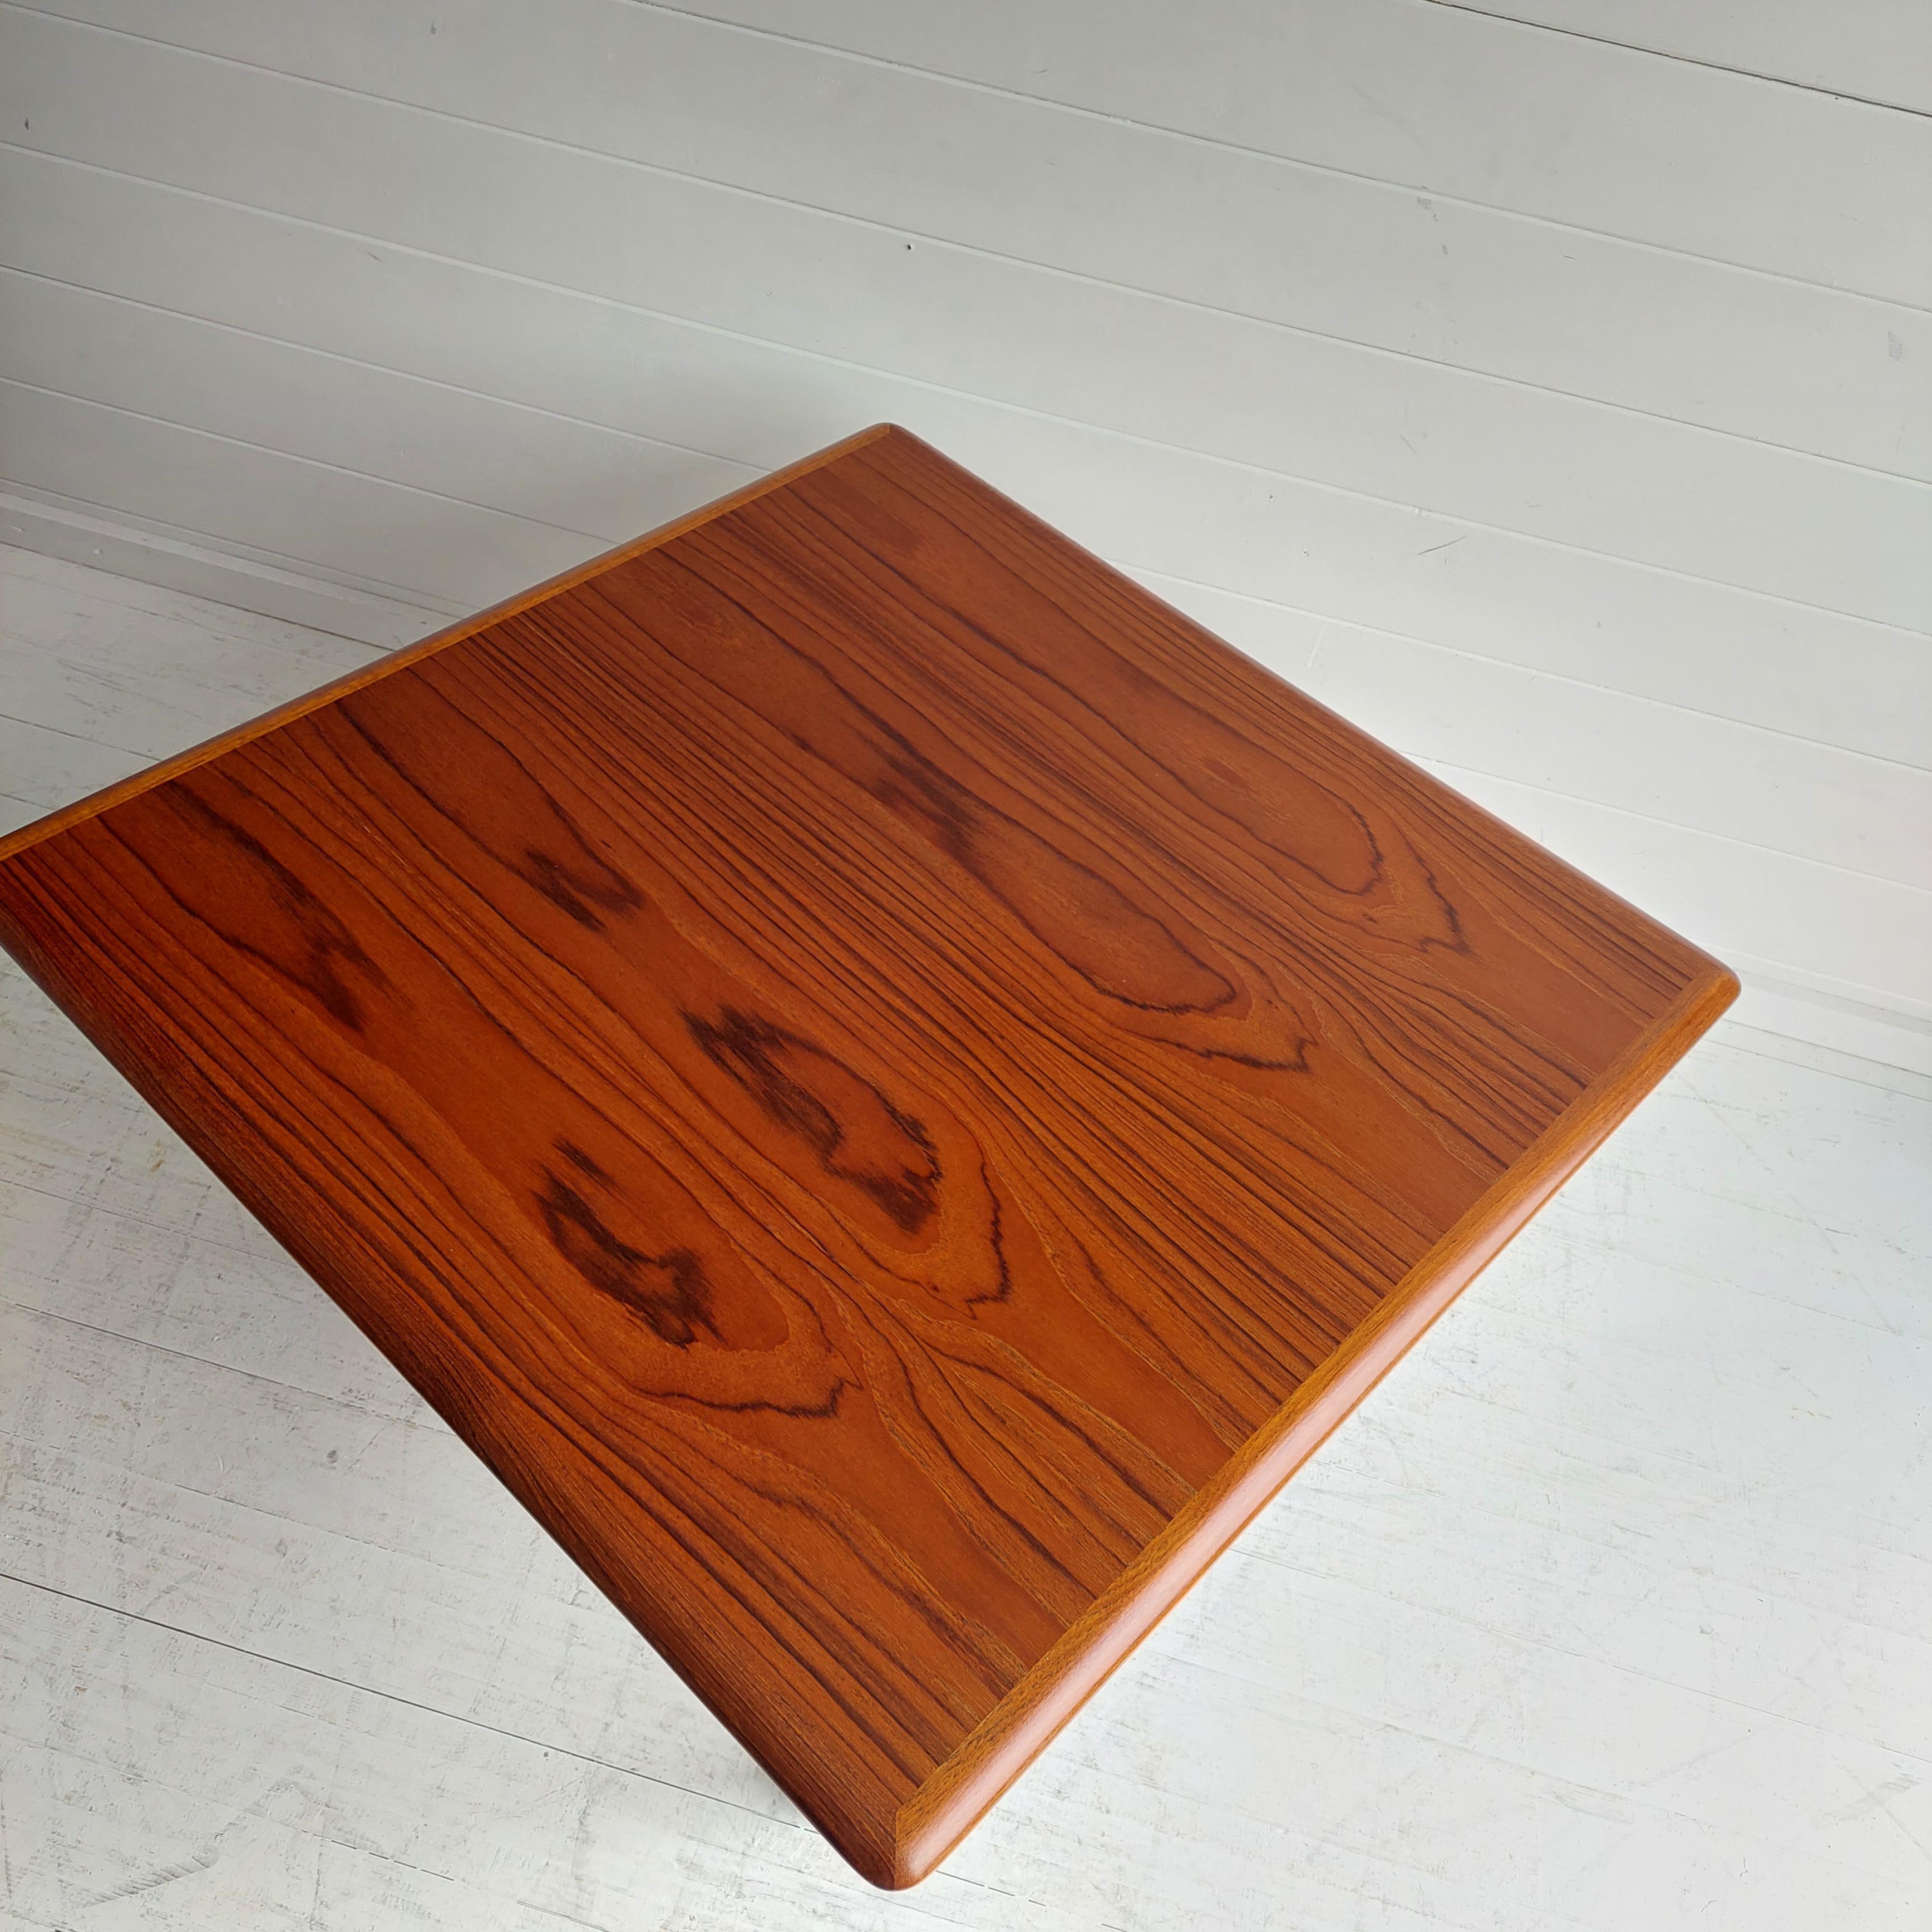 Midcentury Danish 1960s Teak and Cane Coffee Table by Trioh Møbler 3